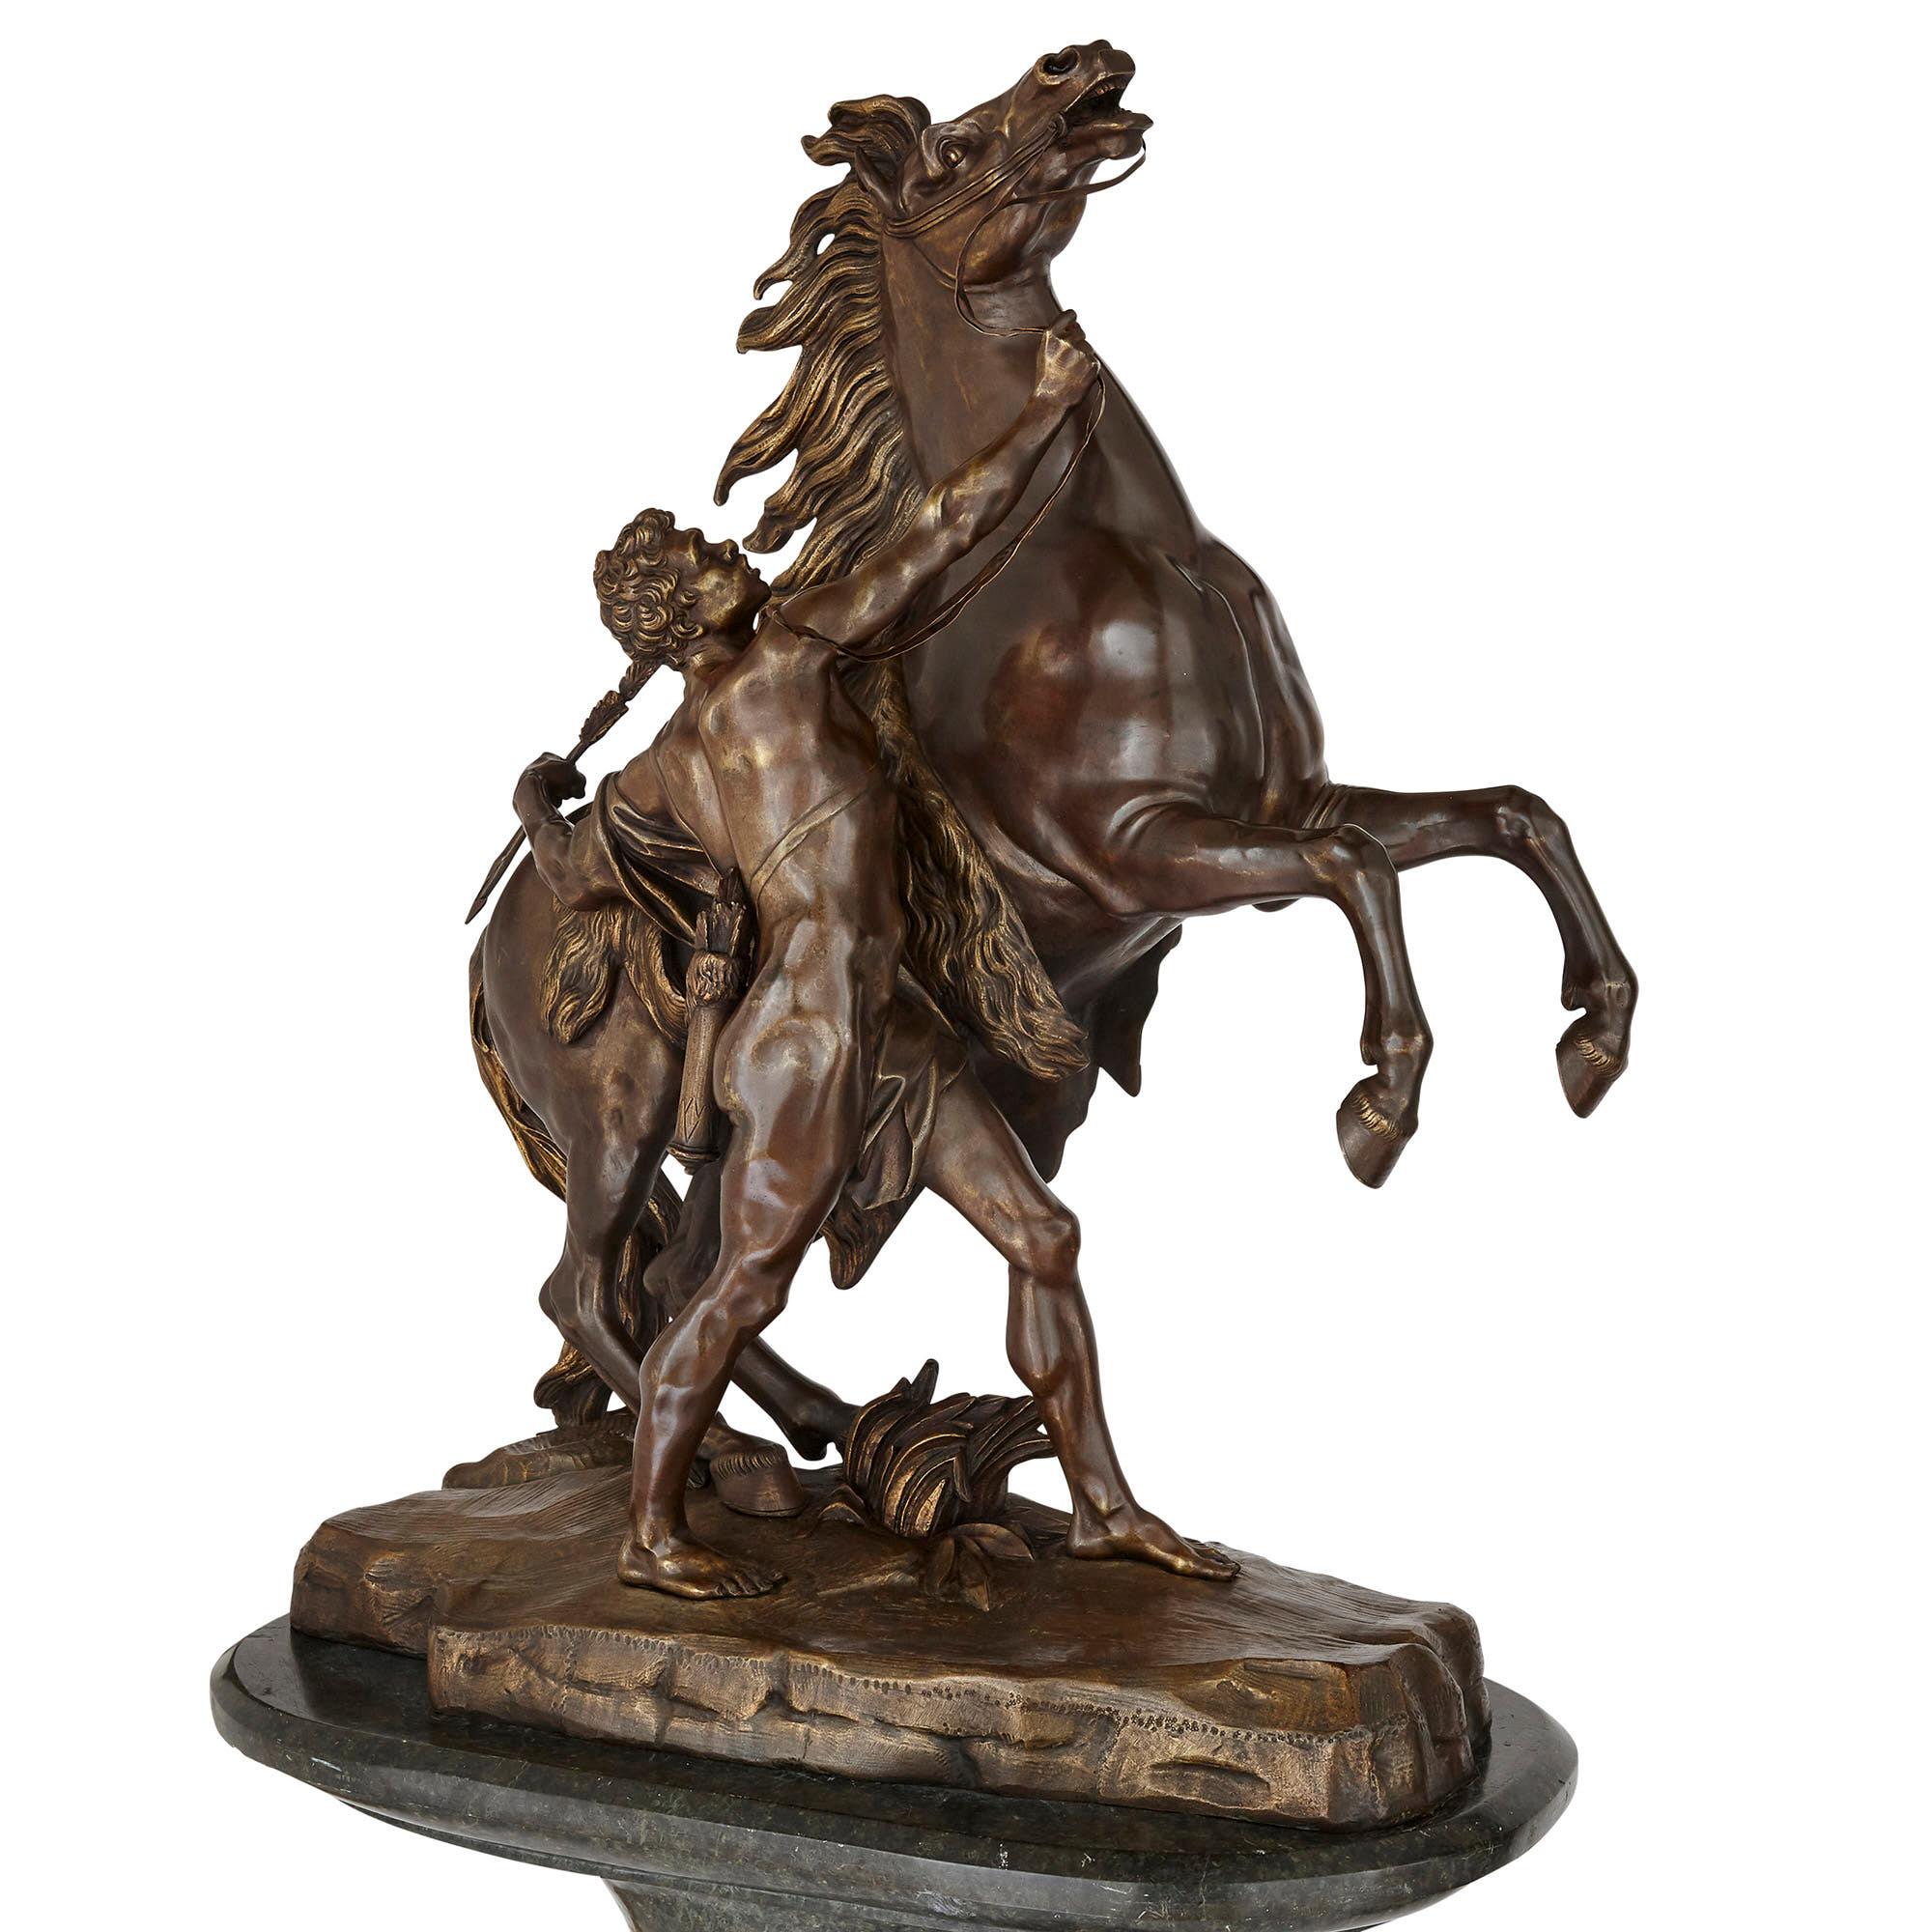 Pair of very large patinated bronze Marly horses with marble pedestals
French, 19th century
Measures: Horses: Height 76cm, width 60cm, depth 32cm
Pedestals: Height 92cm, width 65cm, depth 36cm

These superb horses are unusually large examples